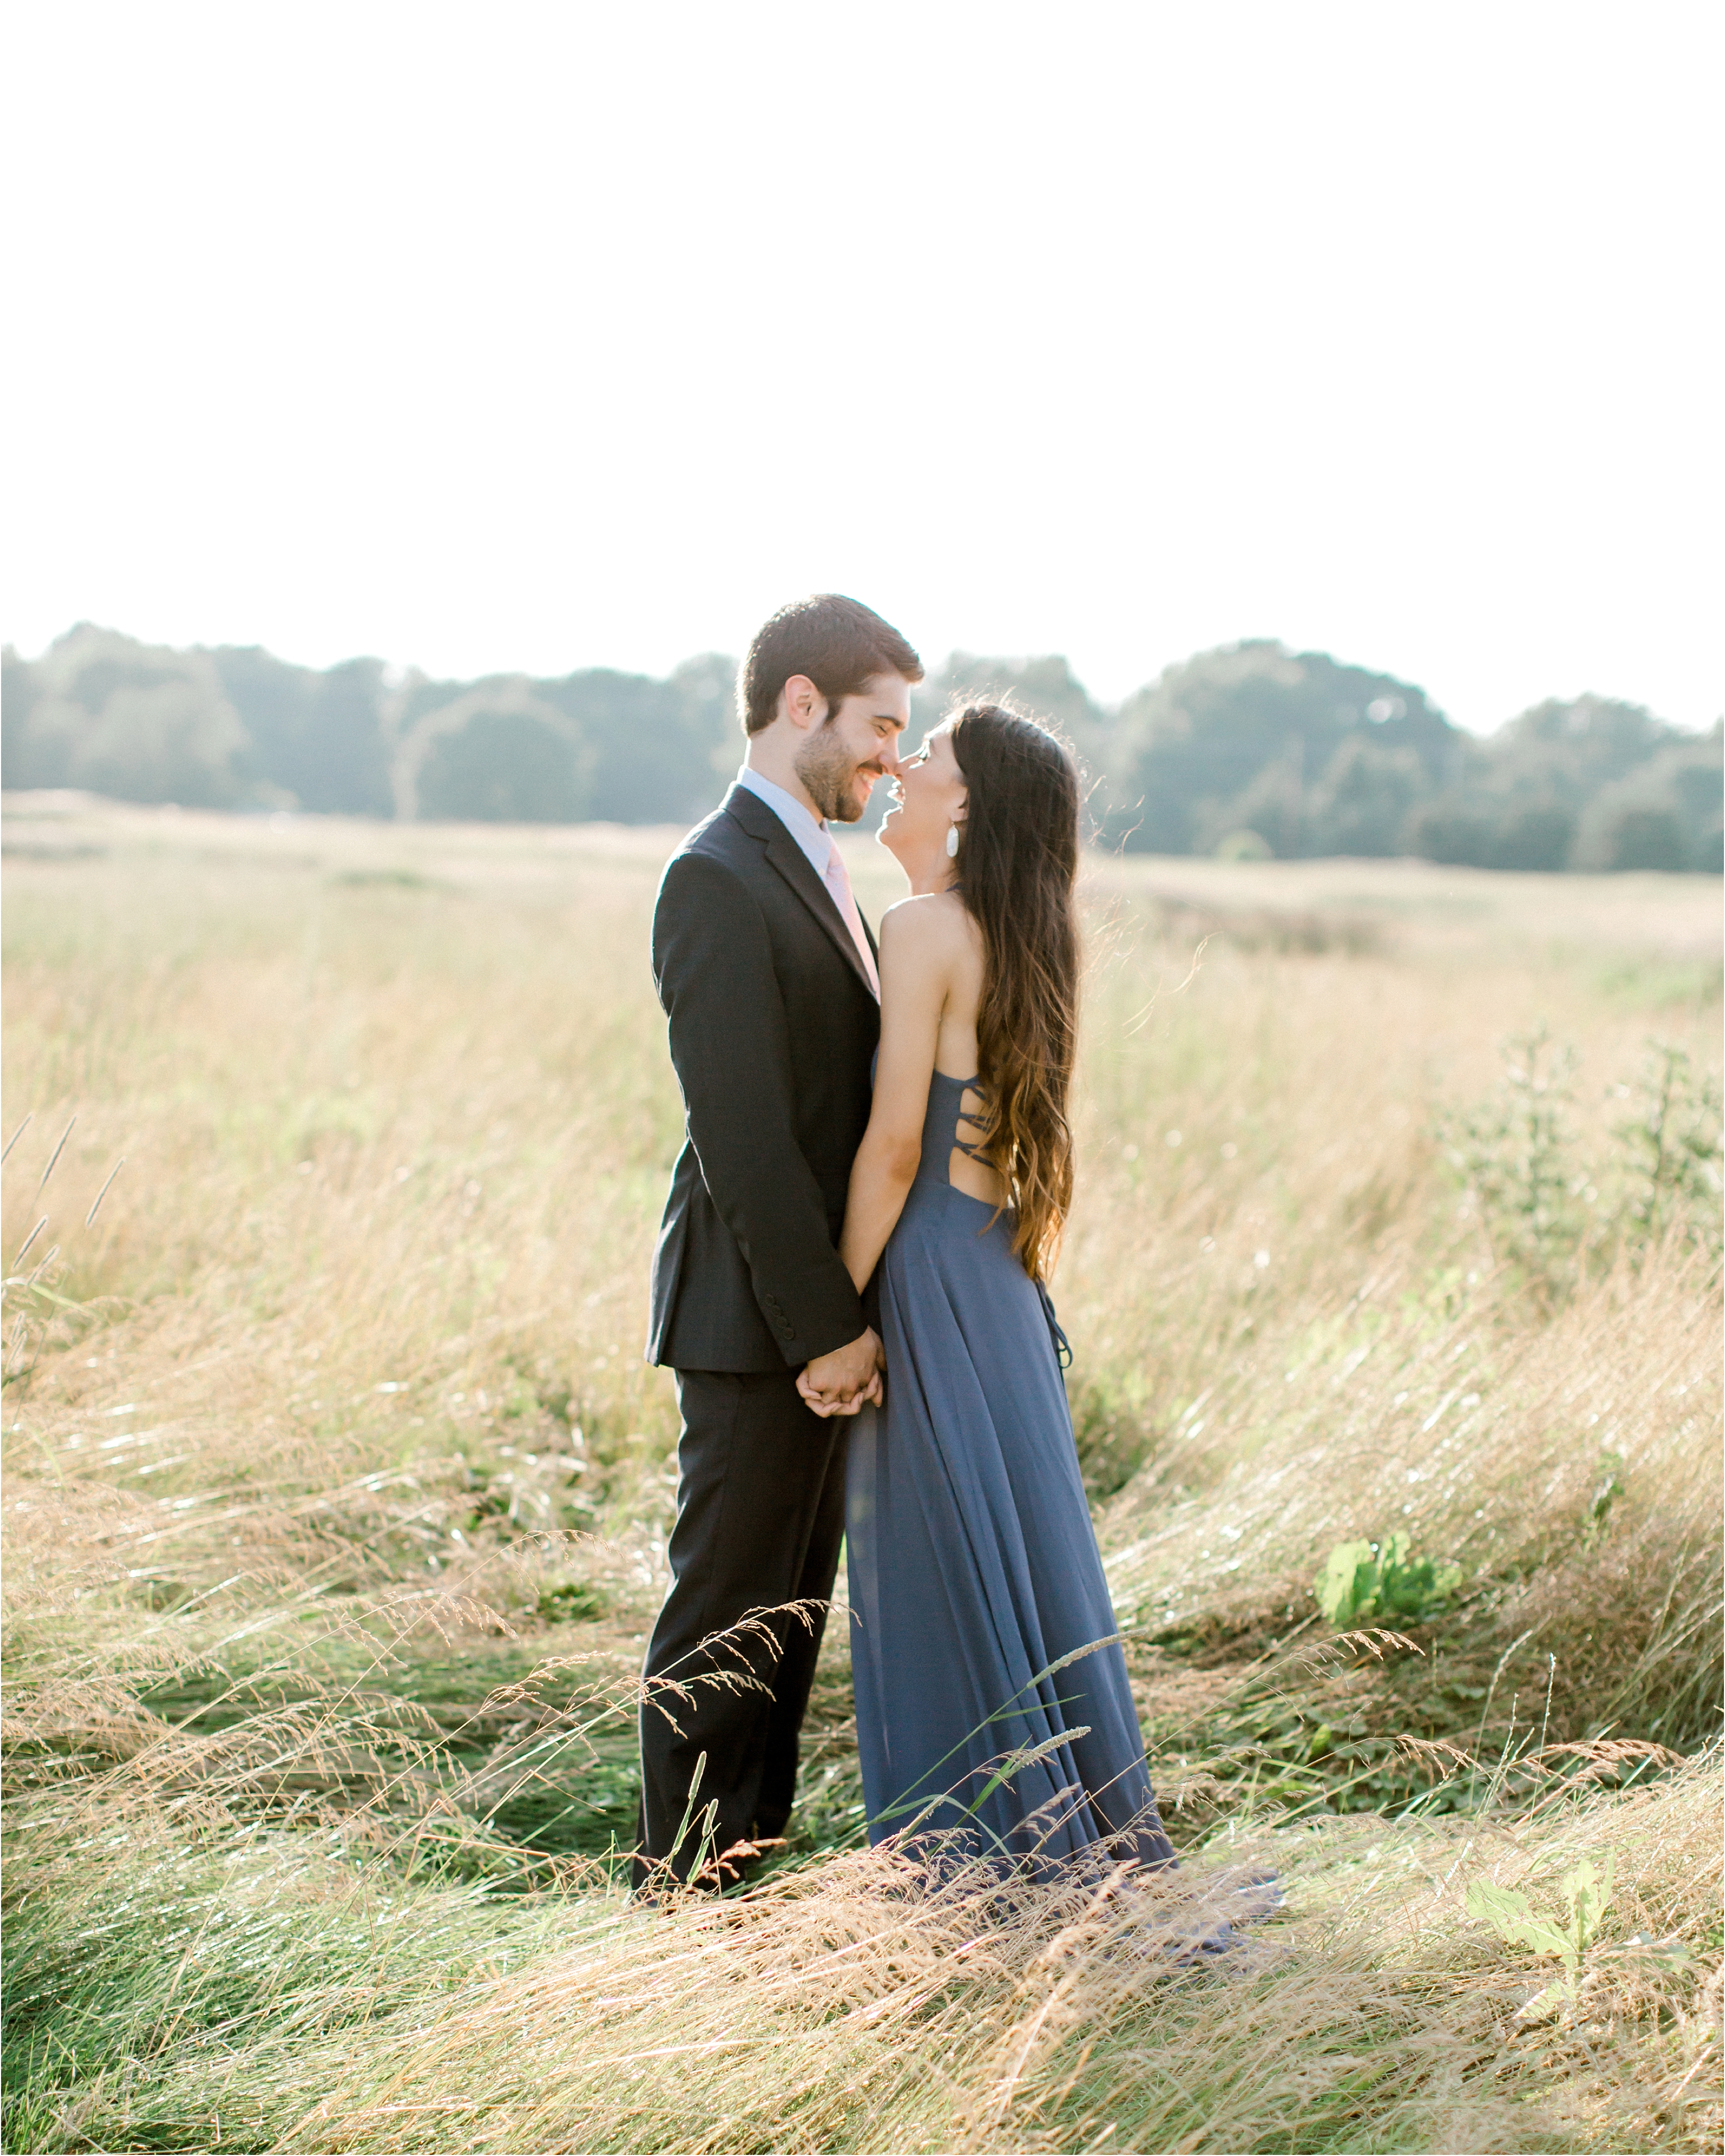 romantic field engagement session in blue dress